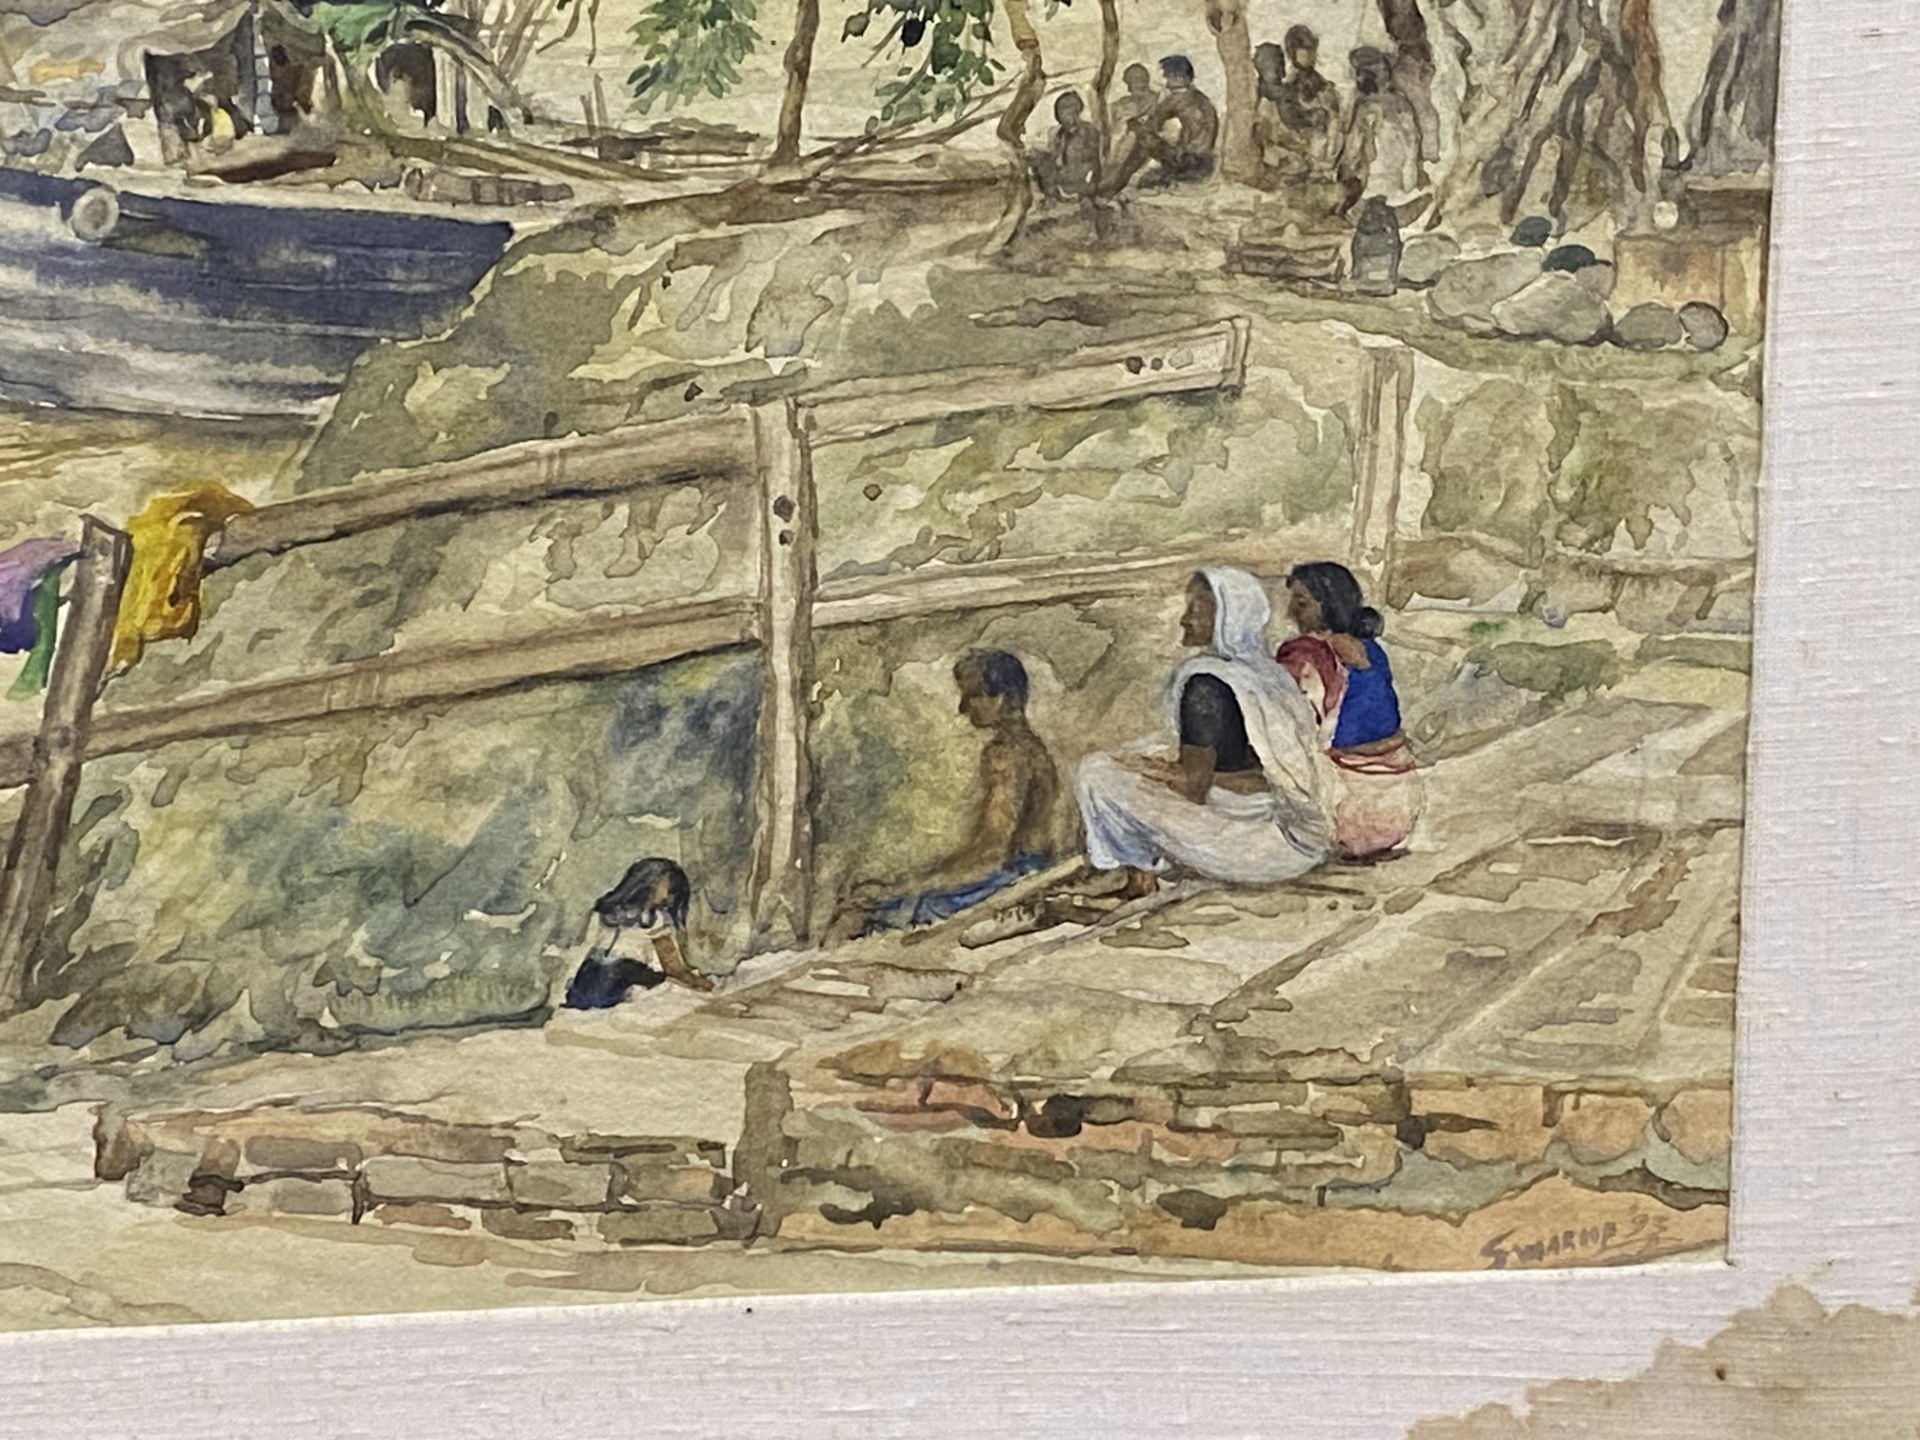 Framed and glazed 19th century watercolour of a river scene in India, signed by artist - Image 4 of 5